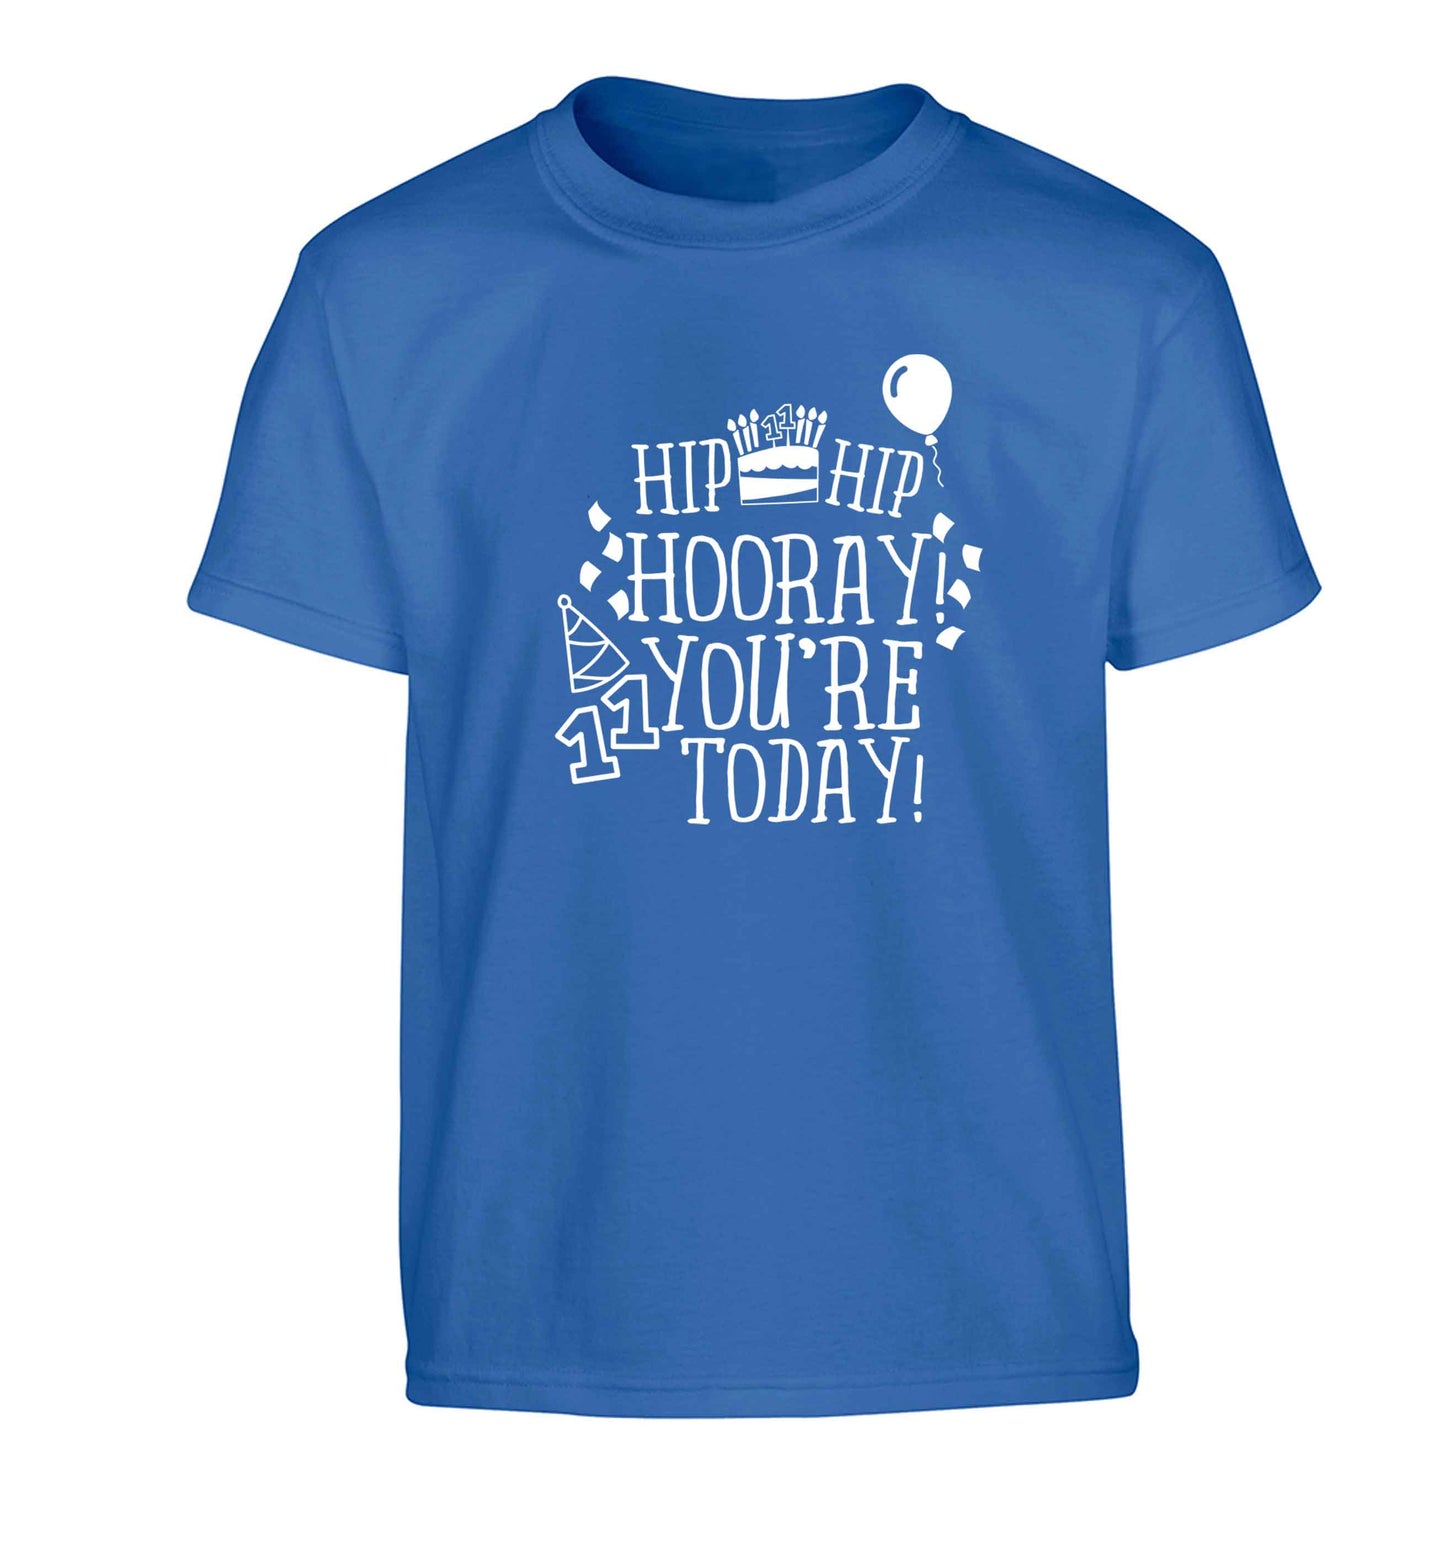 Hip hip hooray I you're eleven today! Children's blue Tshirt 12-13 Years